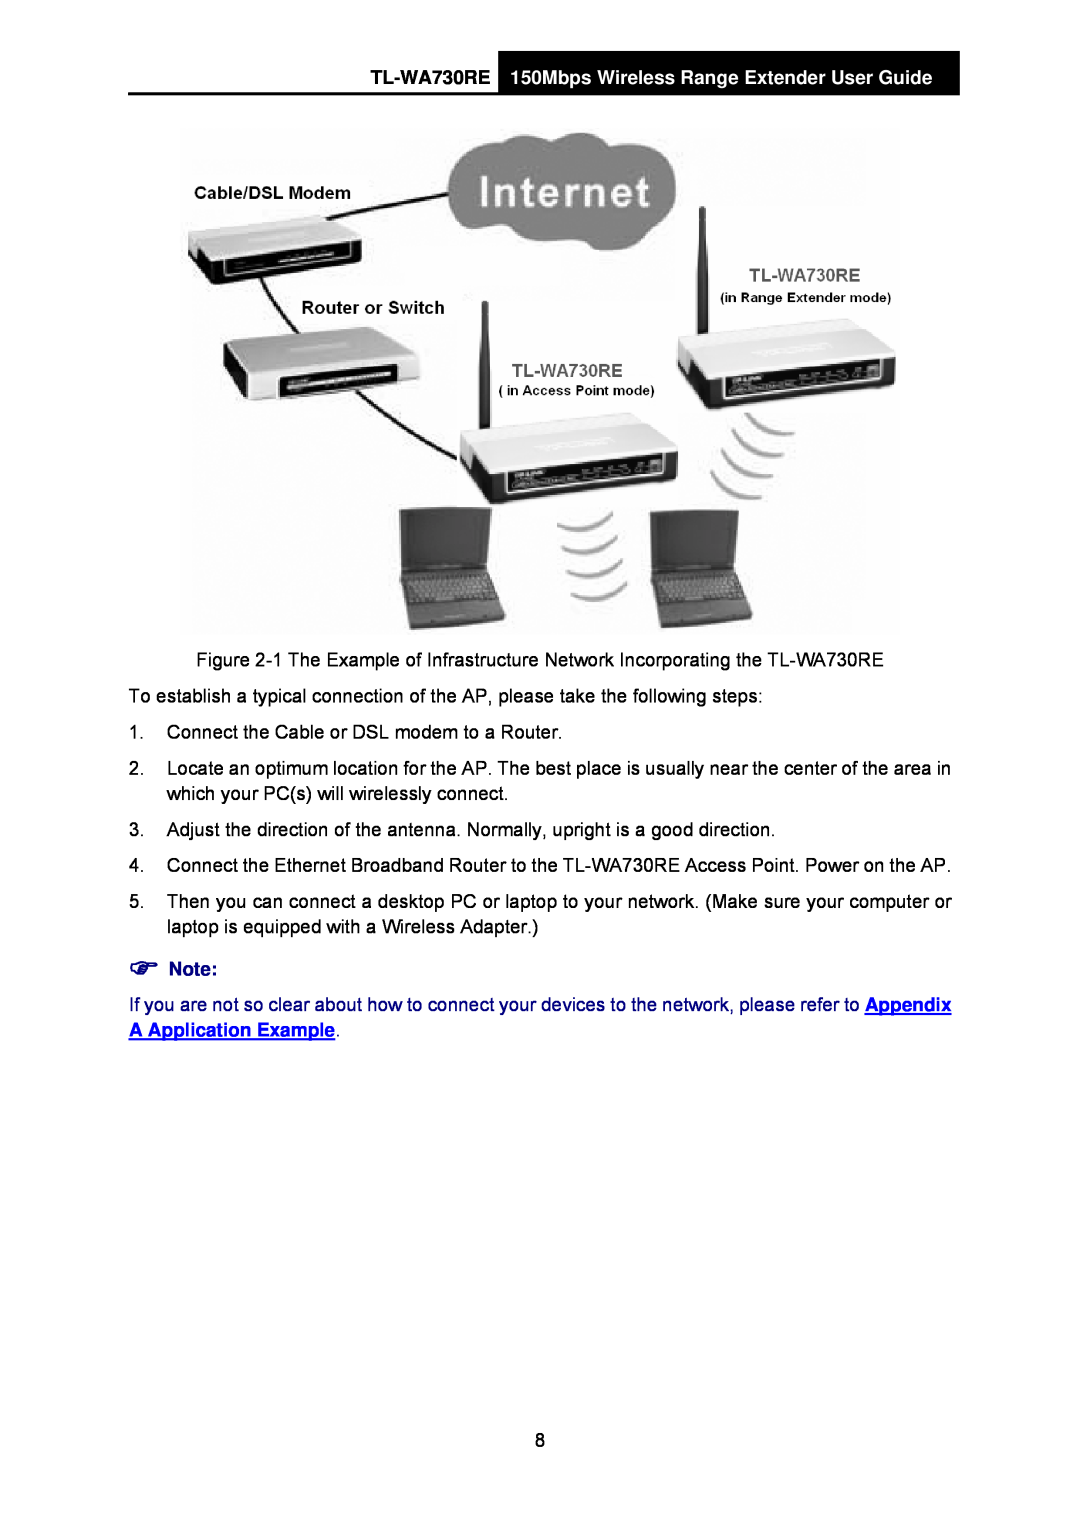 TP-Link manual TL-WA730RE 150Mbps Wireless Range Extender User Guide, Connect the Cable or DSL modem to a Router 